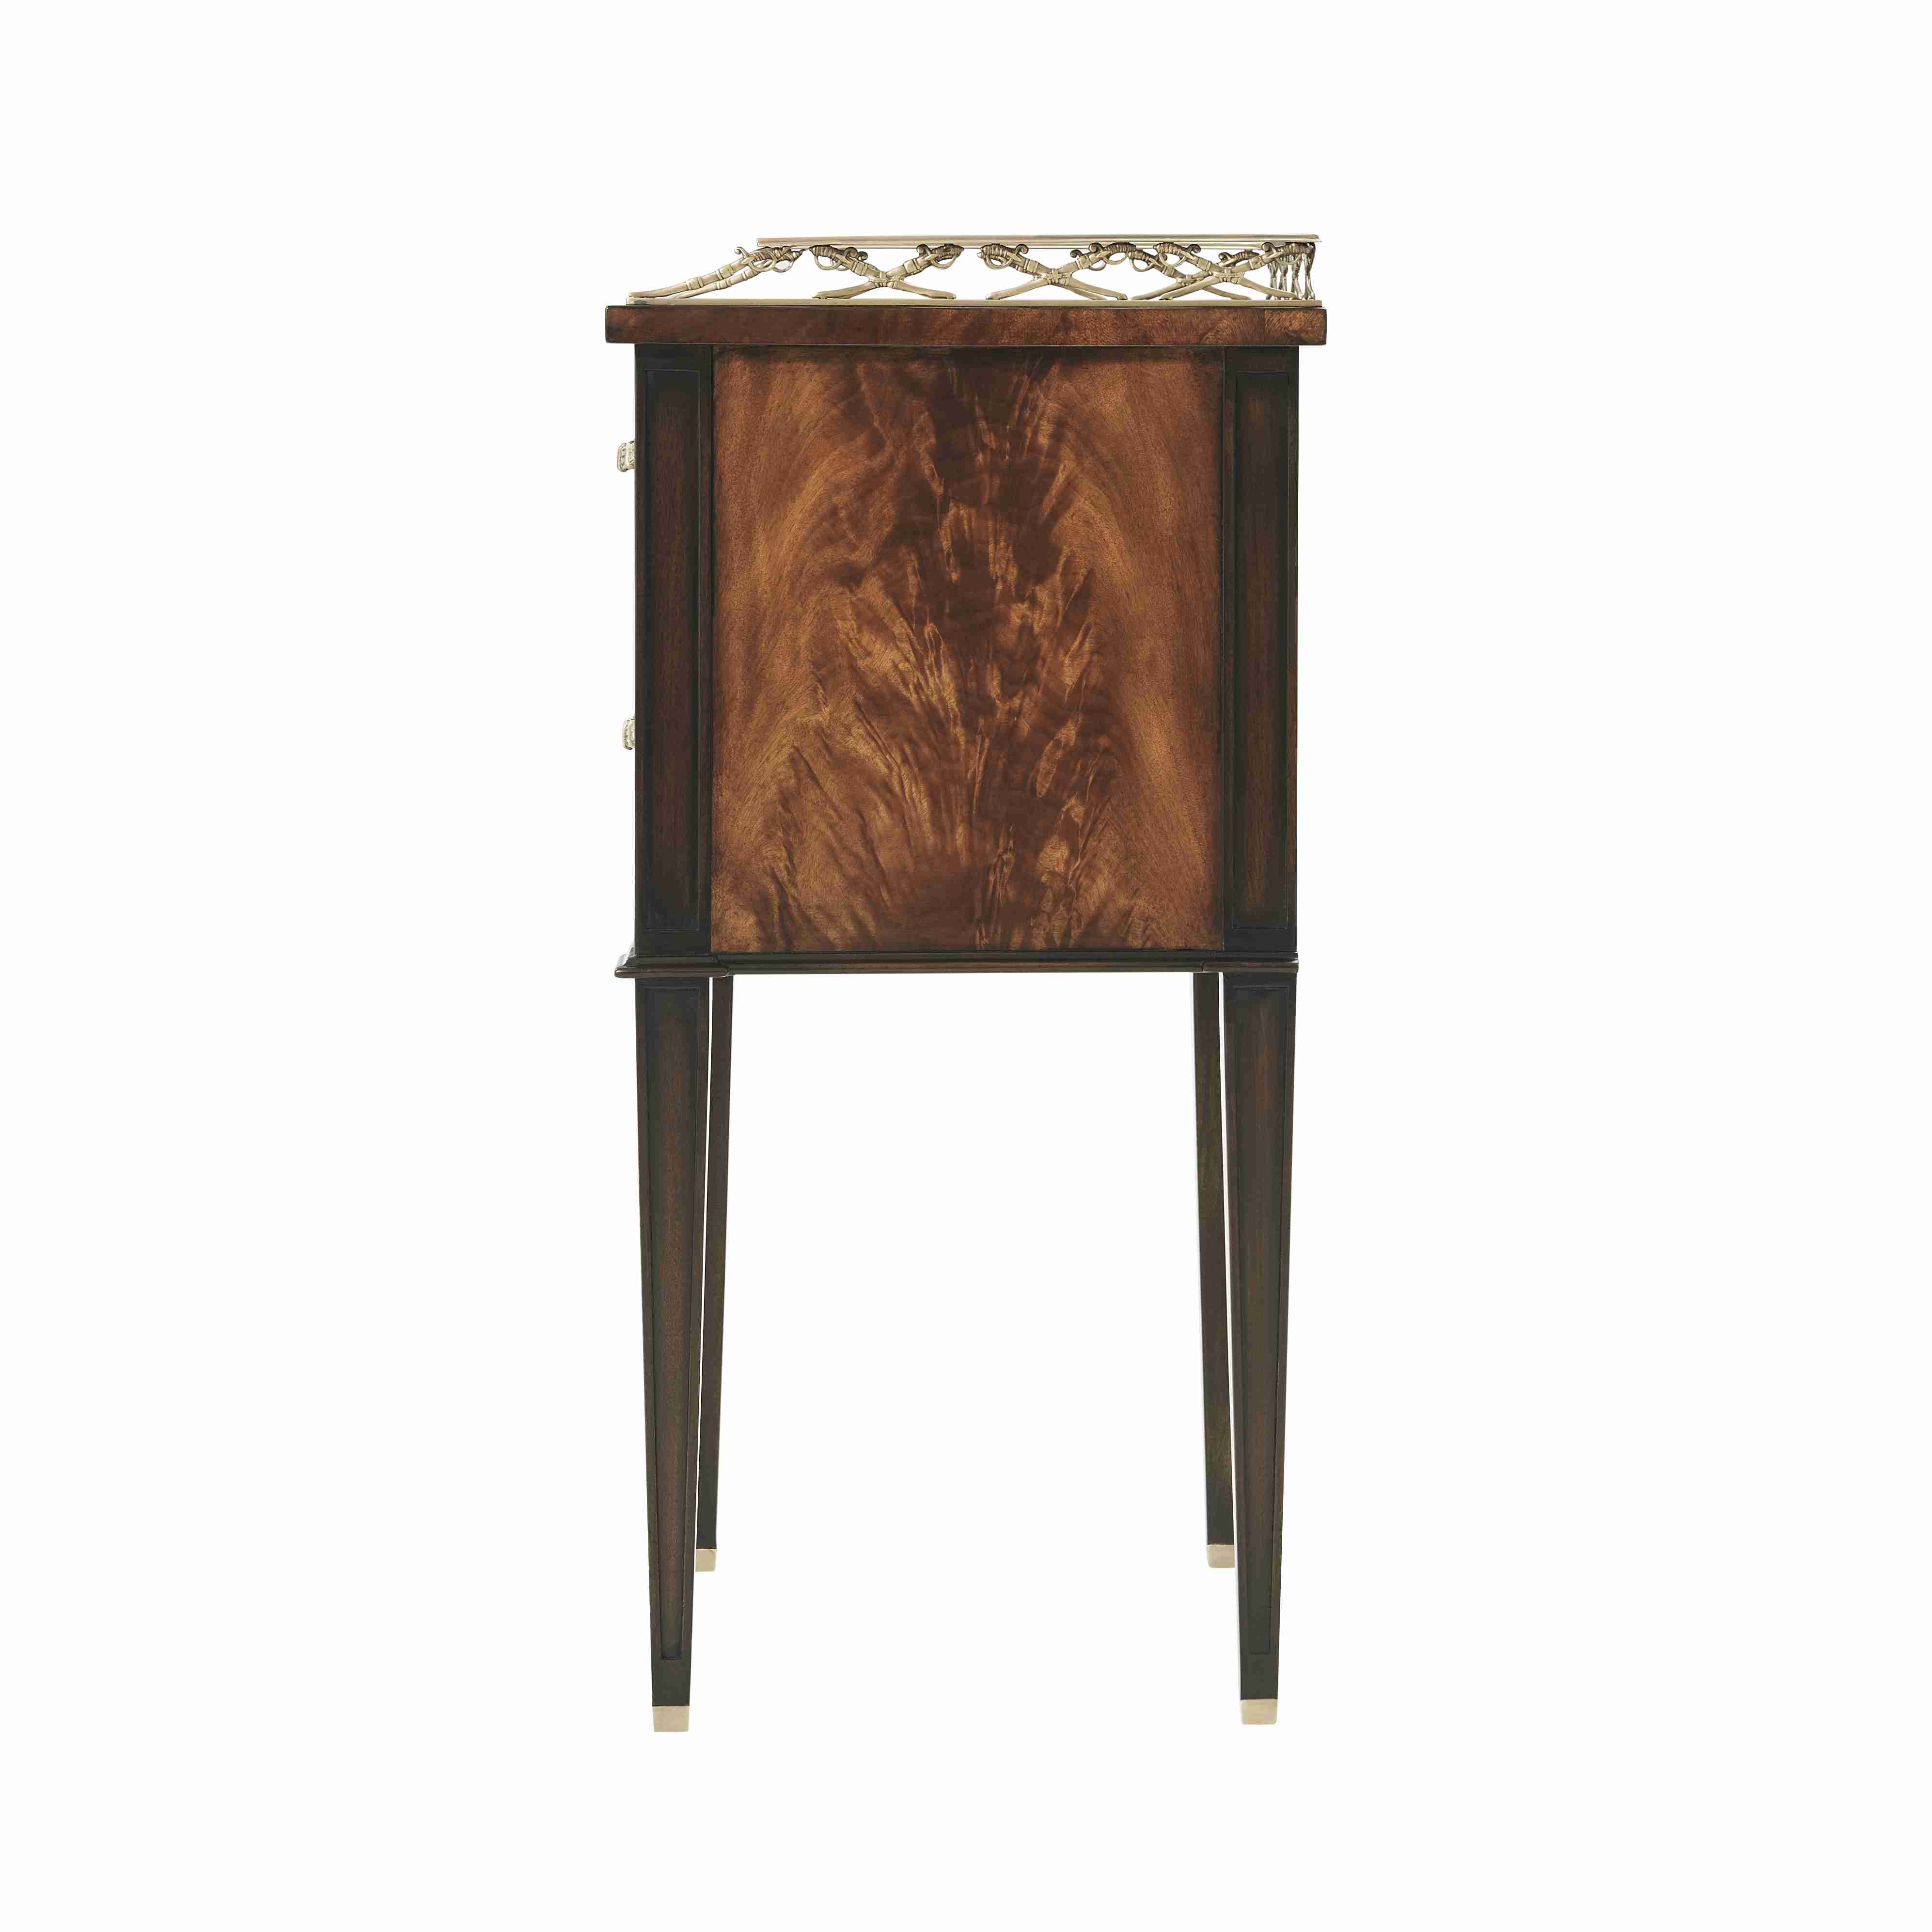 THE ADMIRALTY ACCENT TABLE